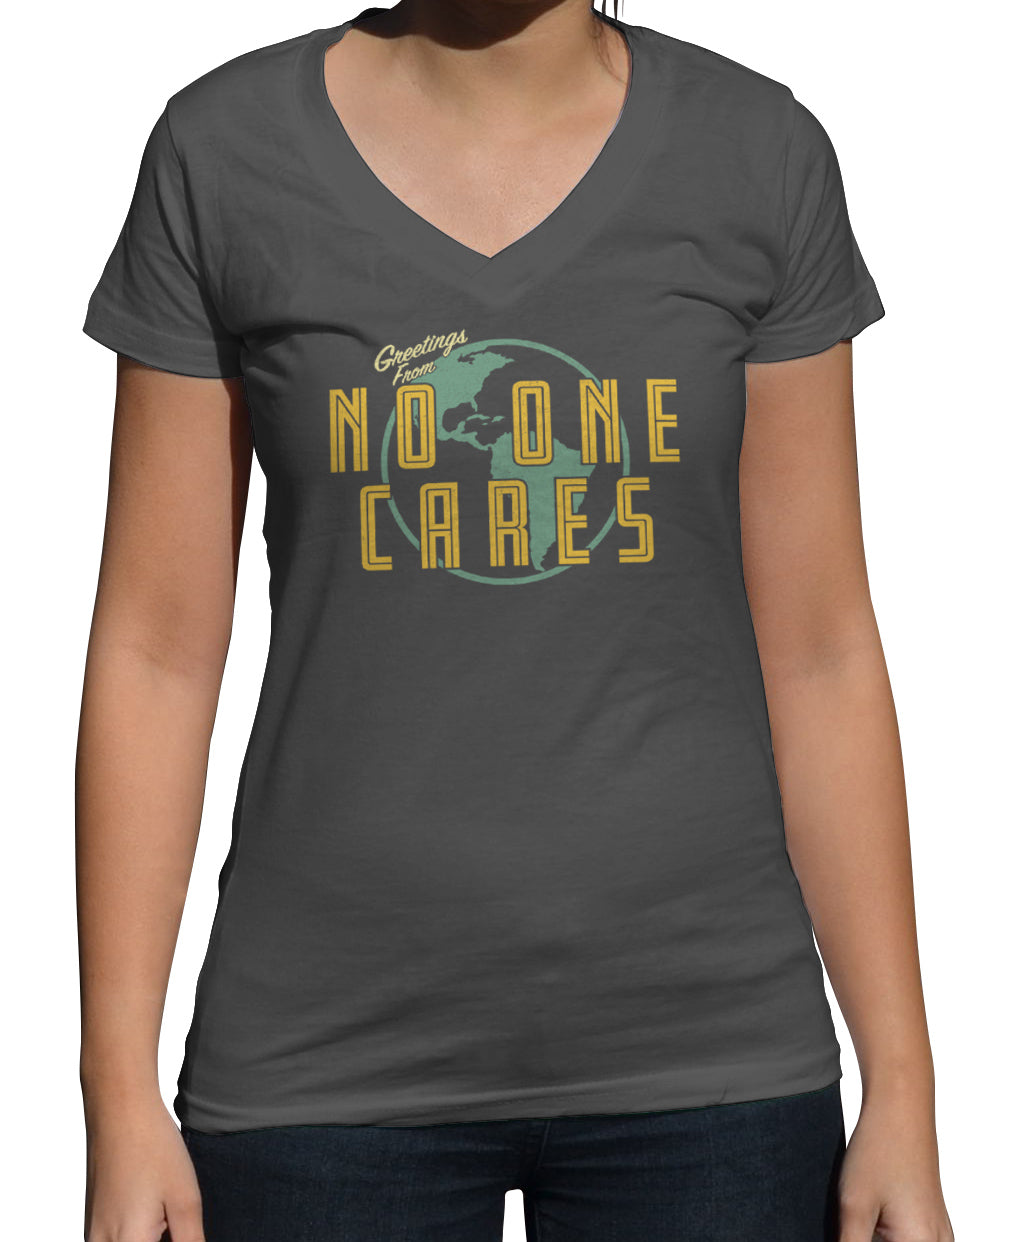 Women's Greetings From No One Cares Vneck T-Shirt